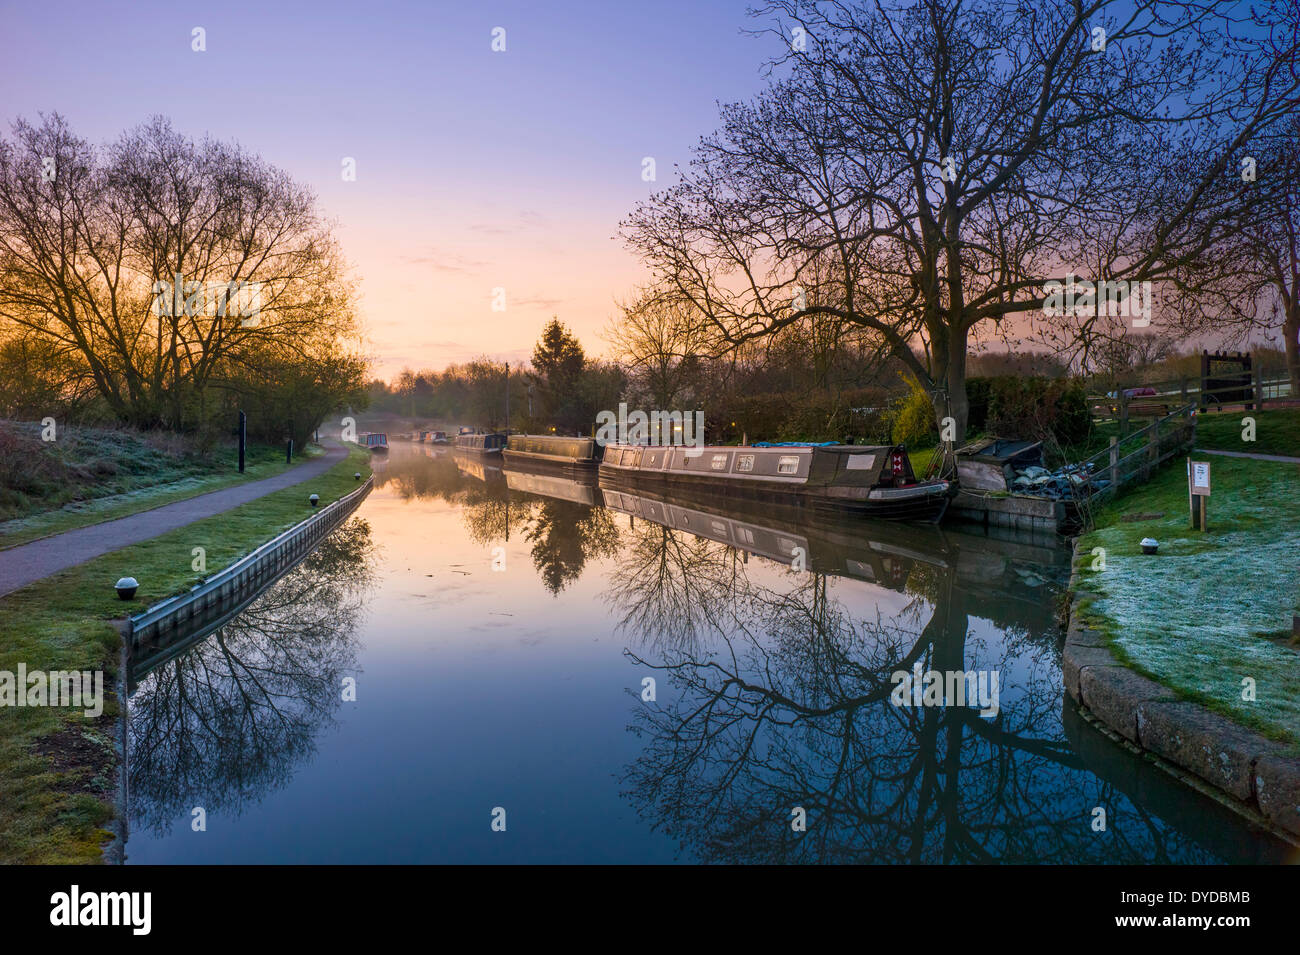 Narrowboats on the Grand Union Canal at Foxton. Stock Photo